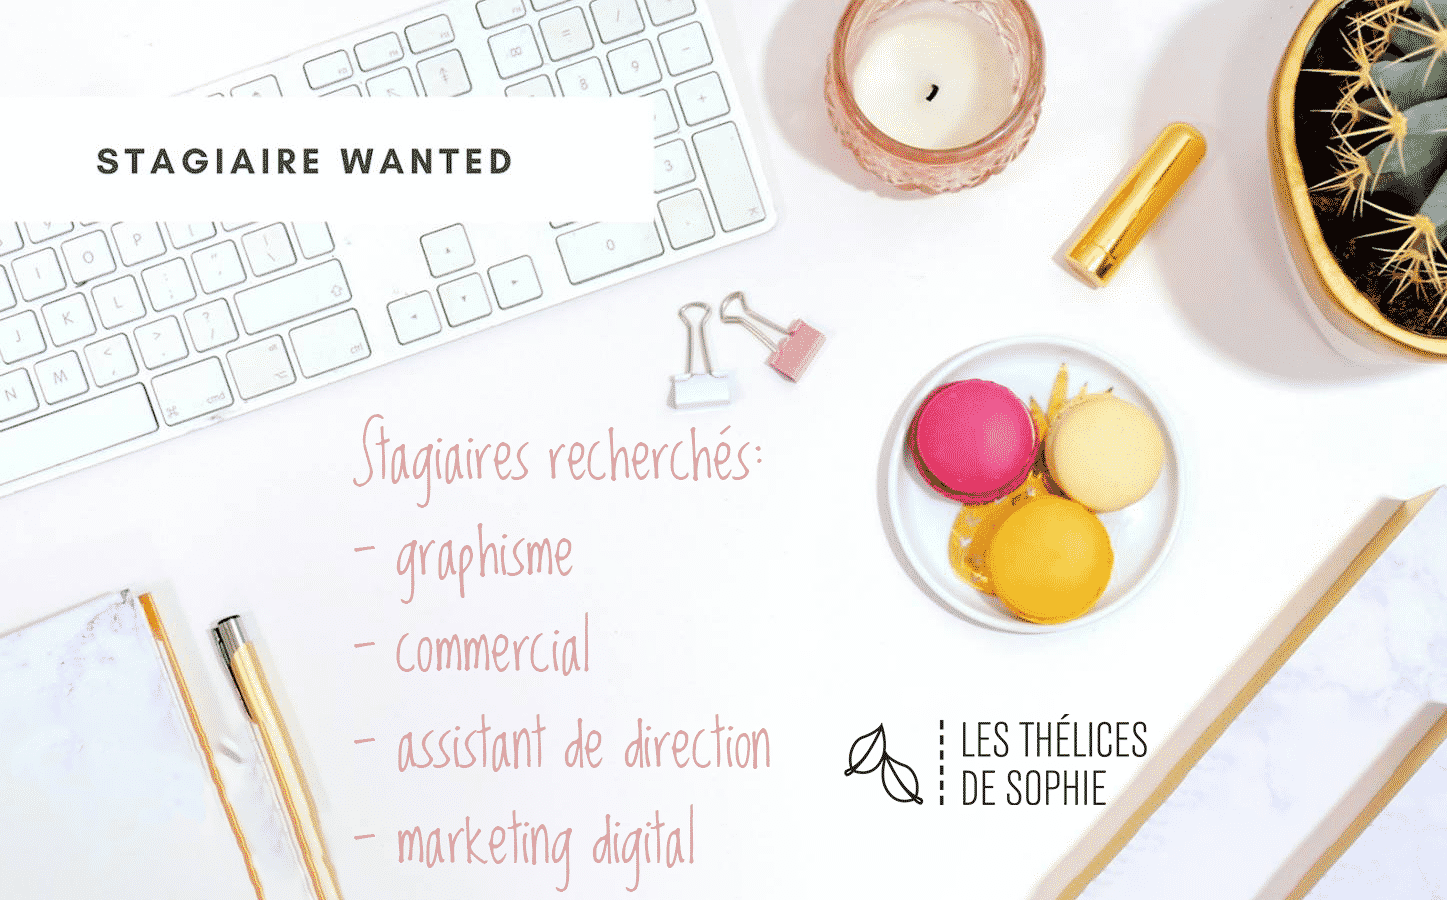 Stagiaires Wanted